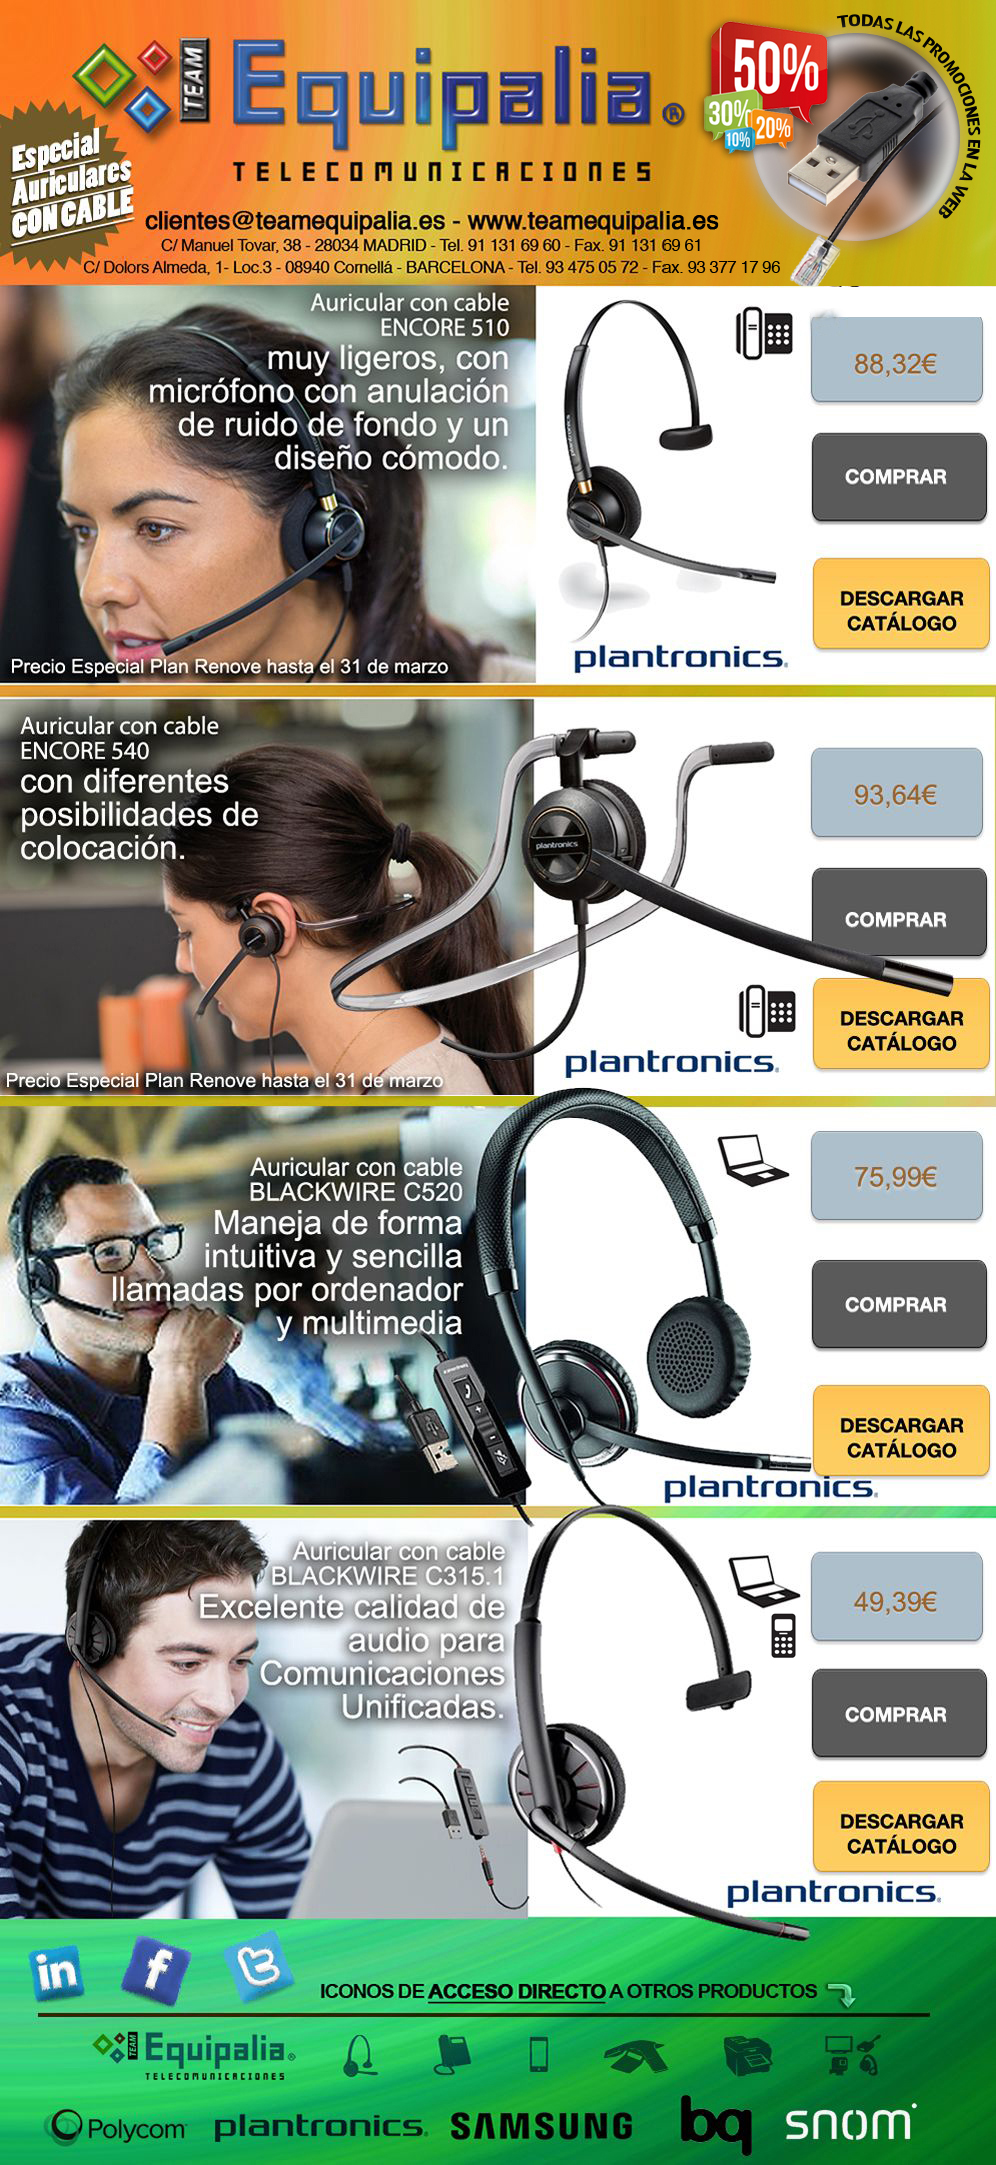 Auriculares con Cable